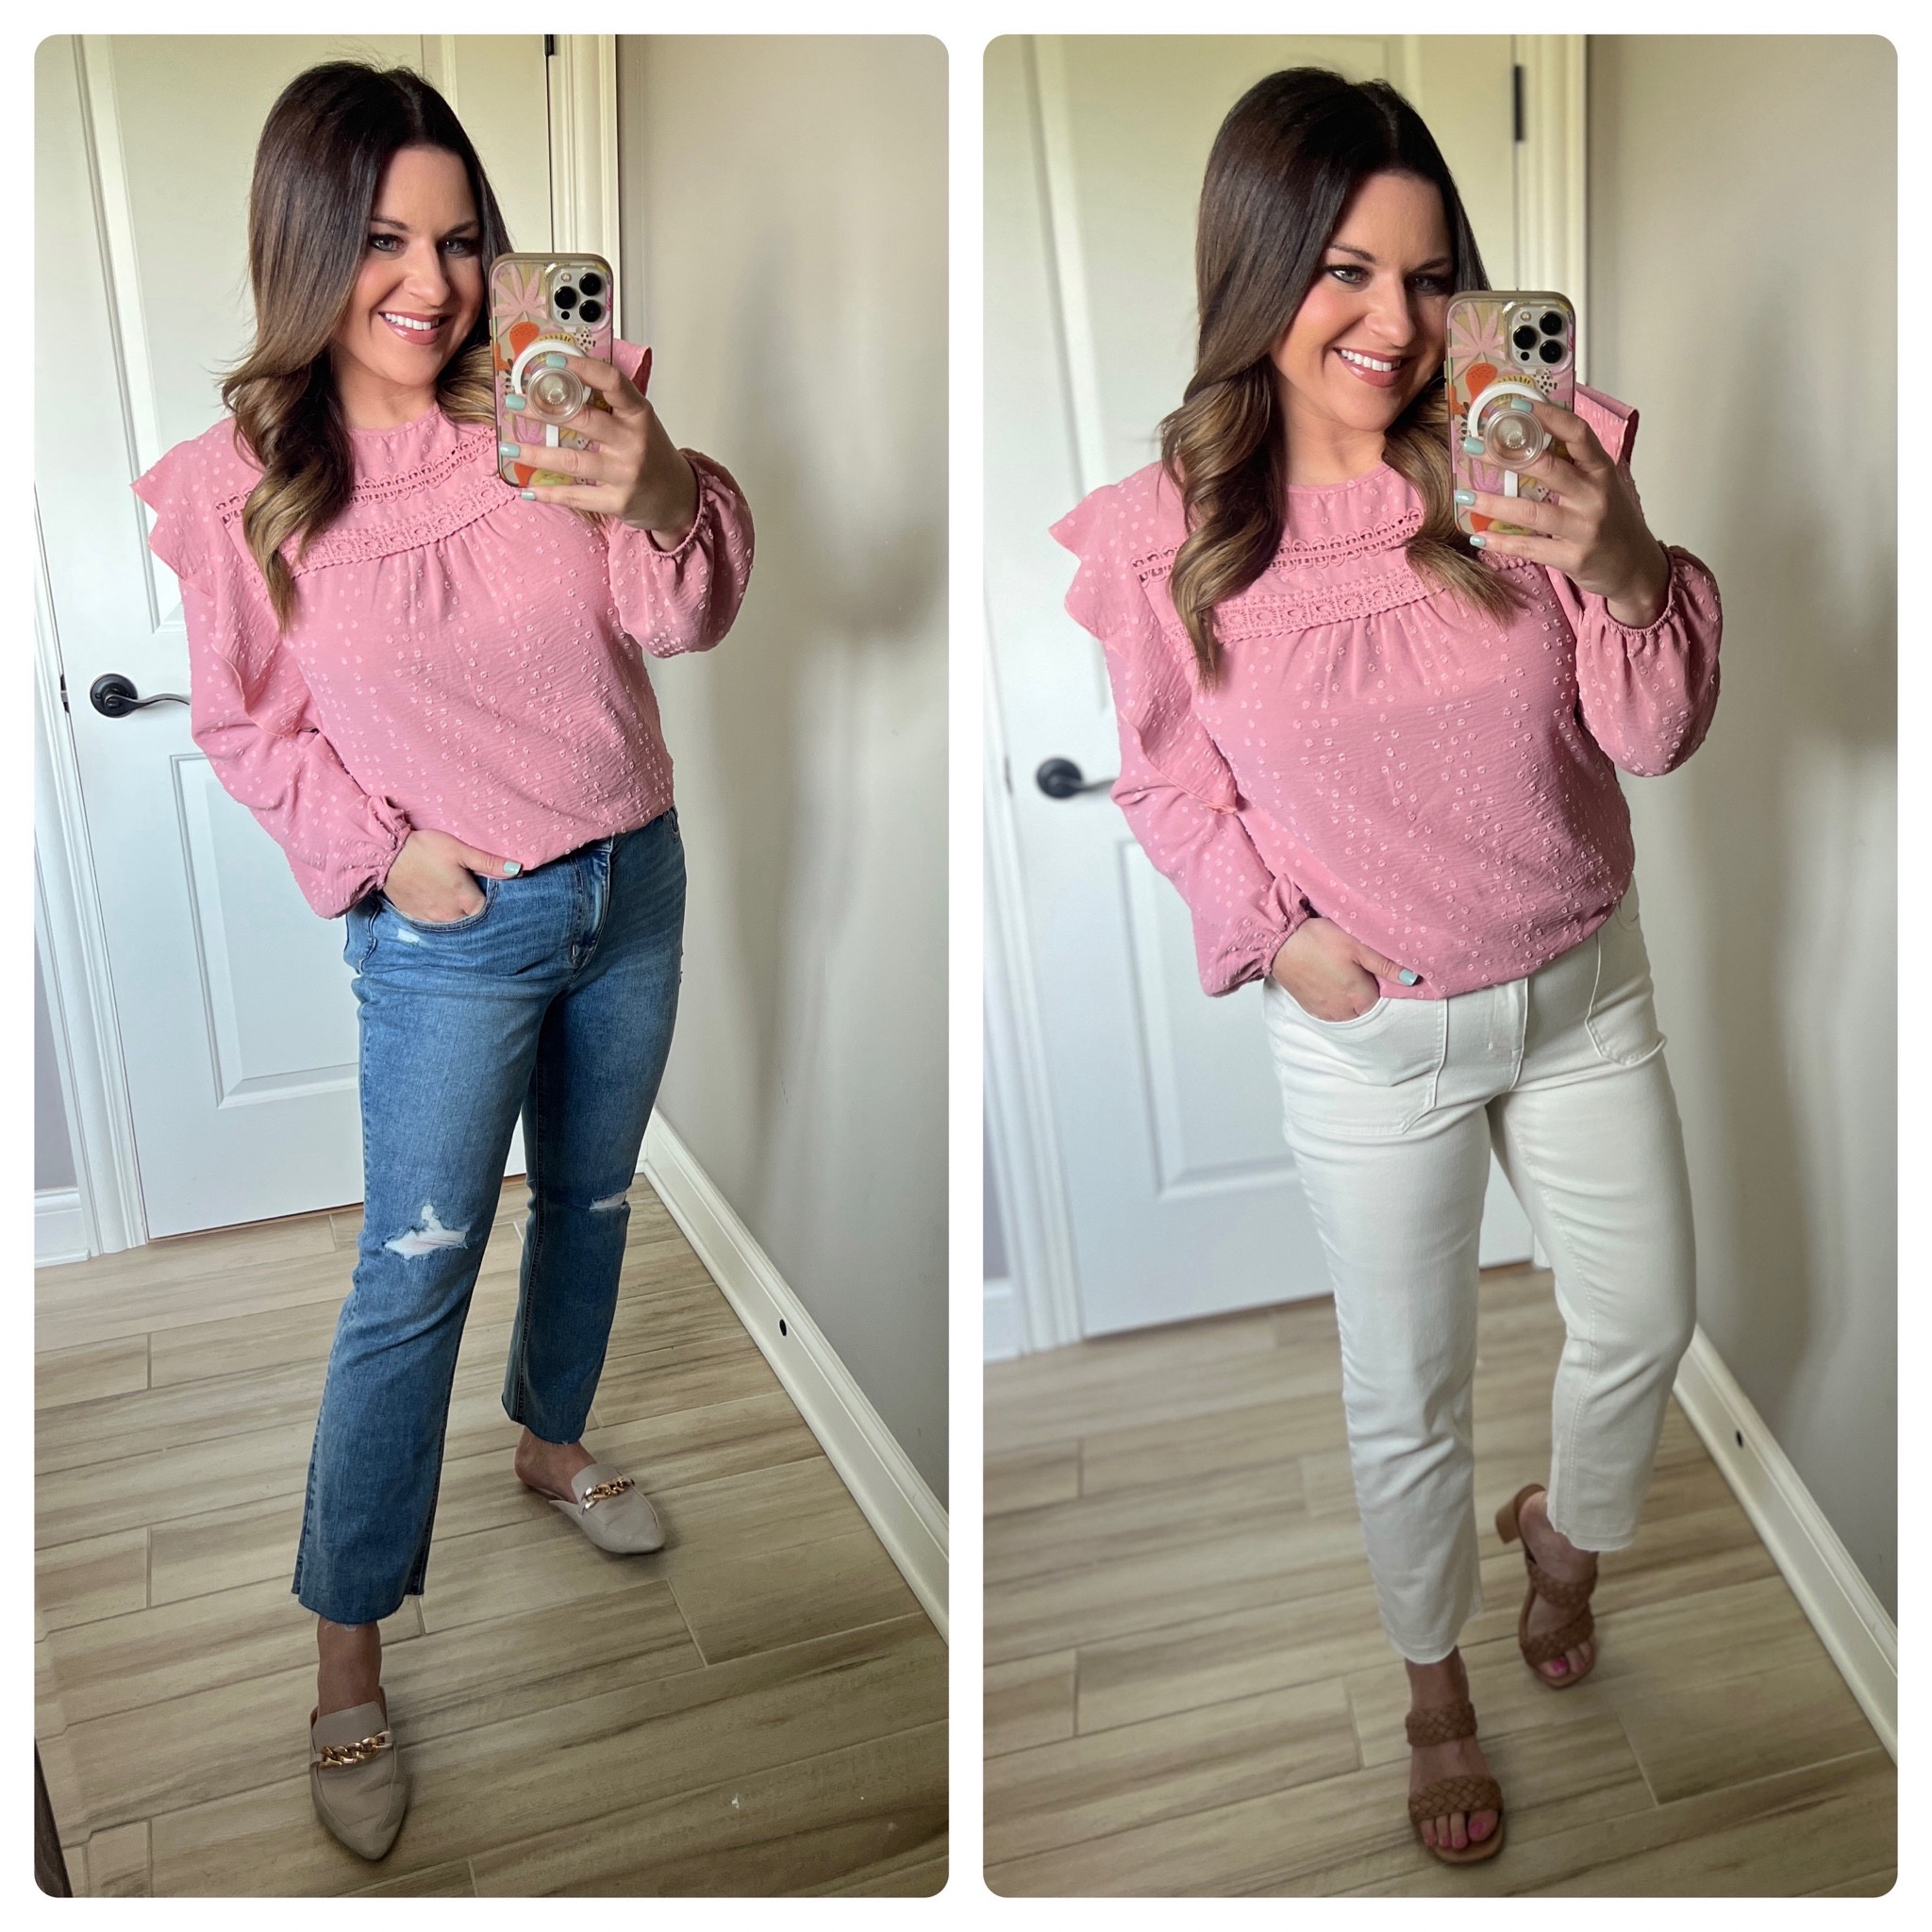 Chic & Comfortable: Spring Fashion for Teachers

spring, spring fashion, spring outfit, pink blouse, denim jeans, work outfit, workwear